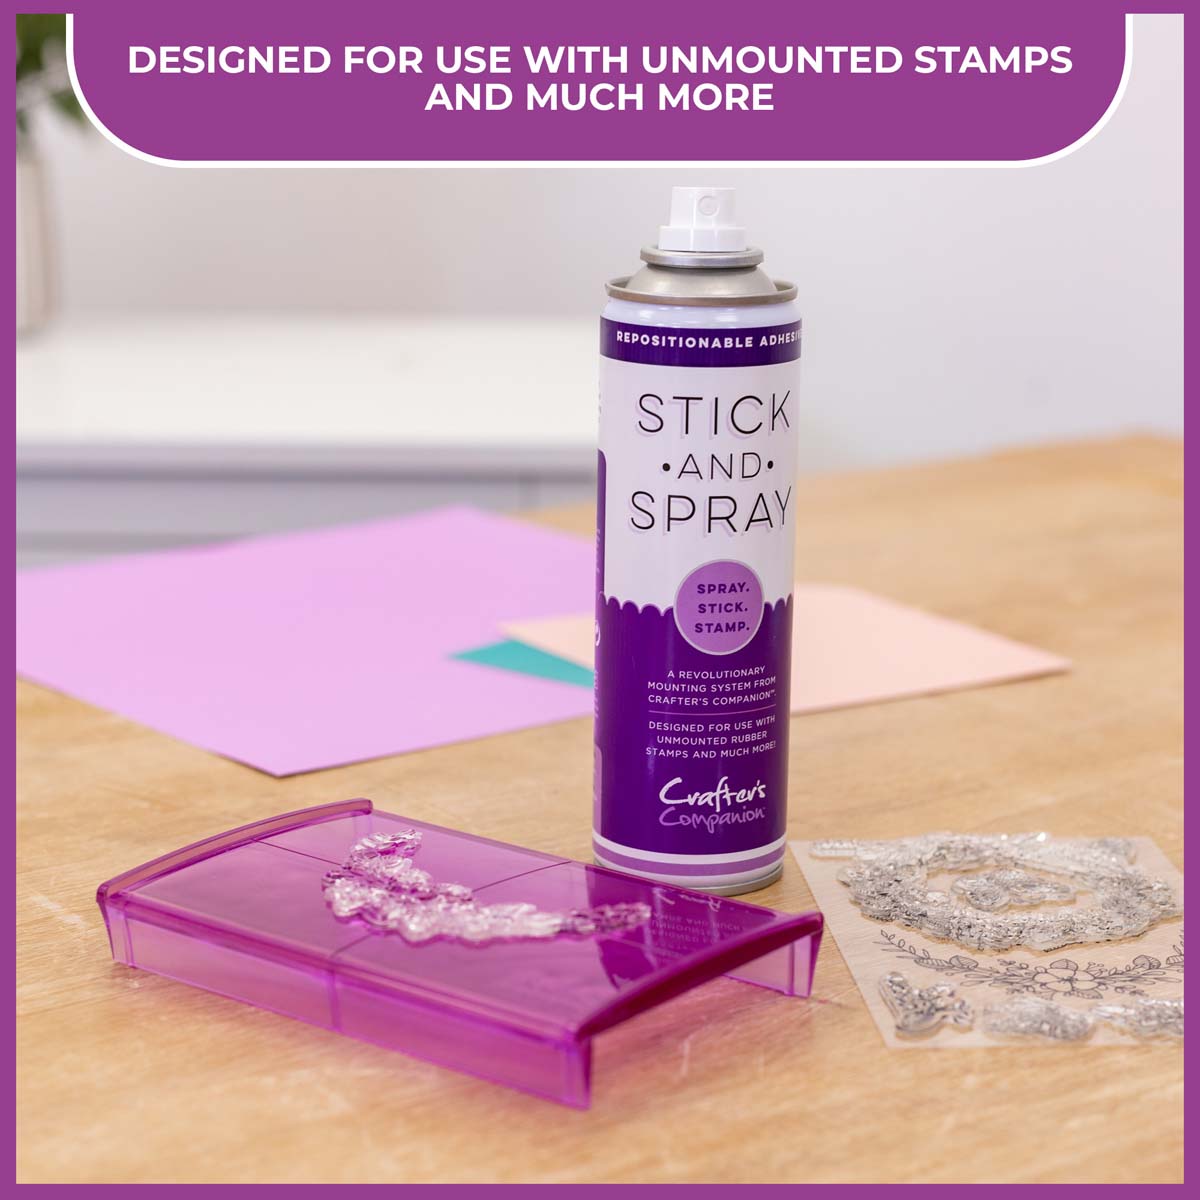 Crafter's Companion - Stick and Spray Mounting Adesive (Purple Can)